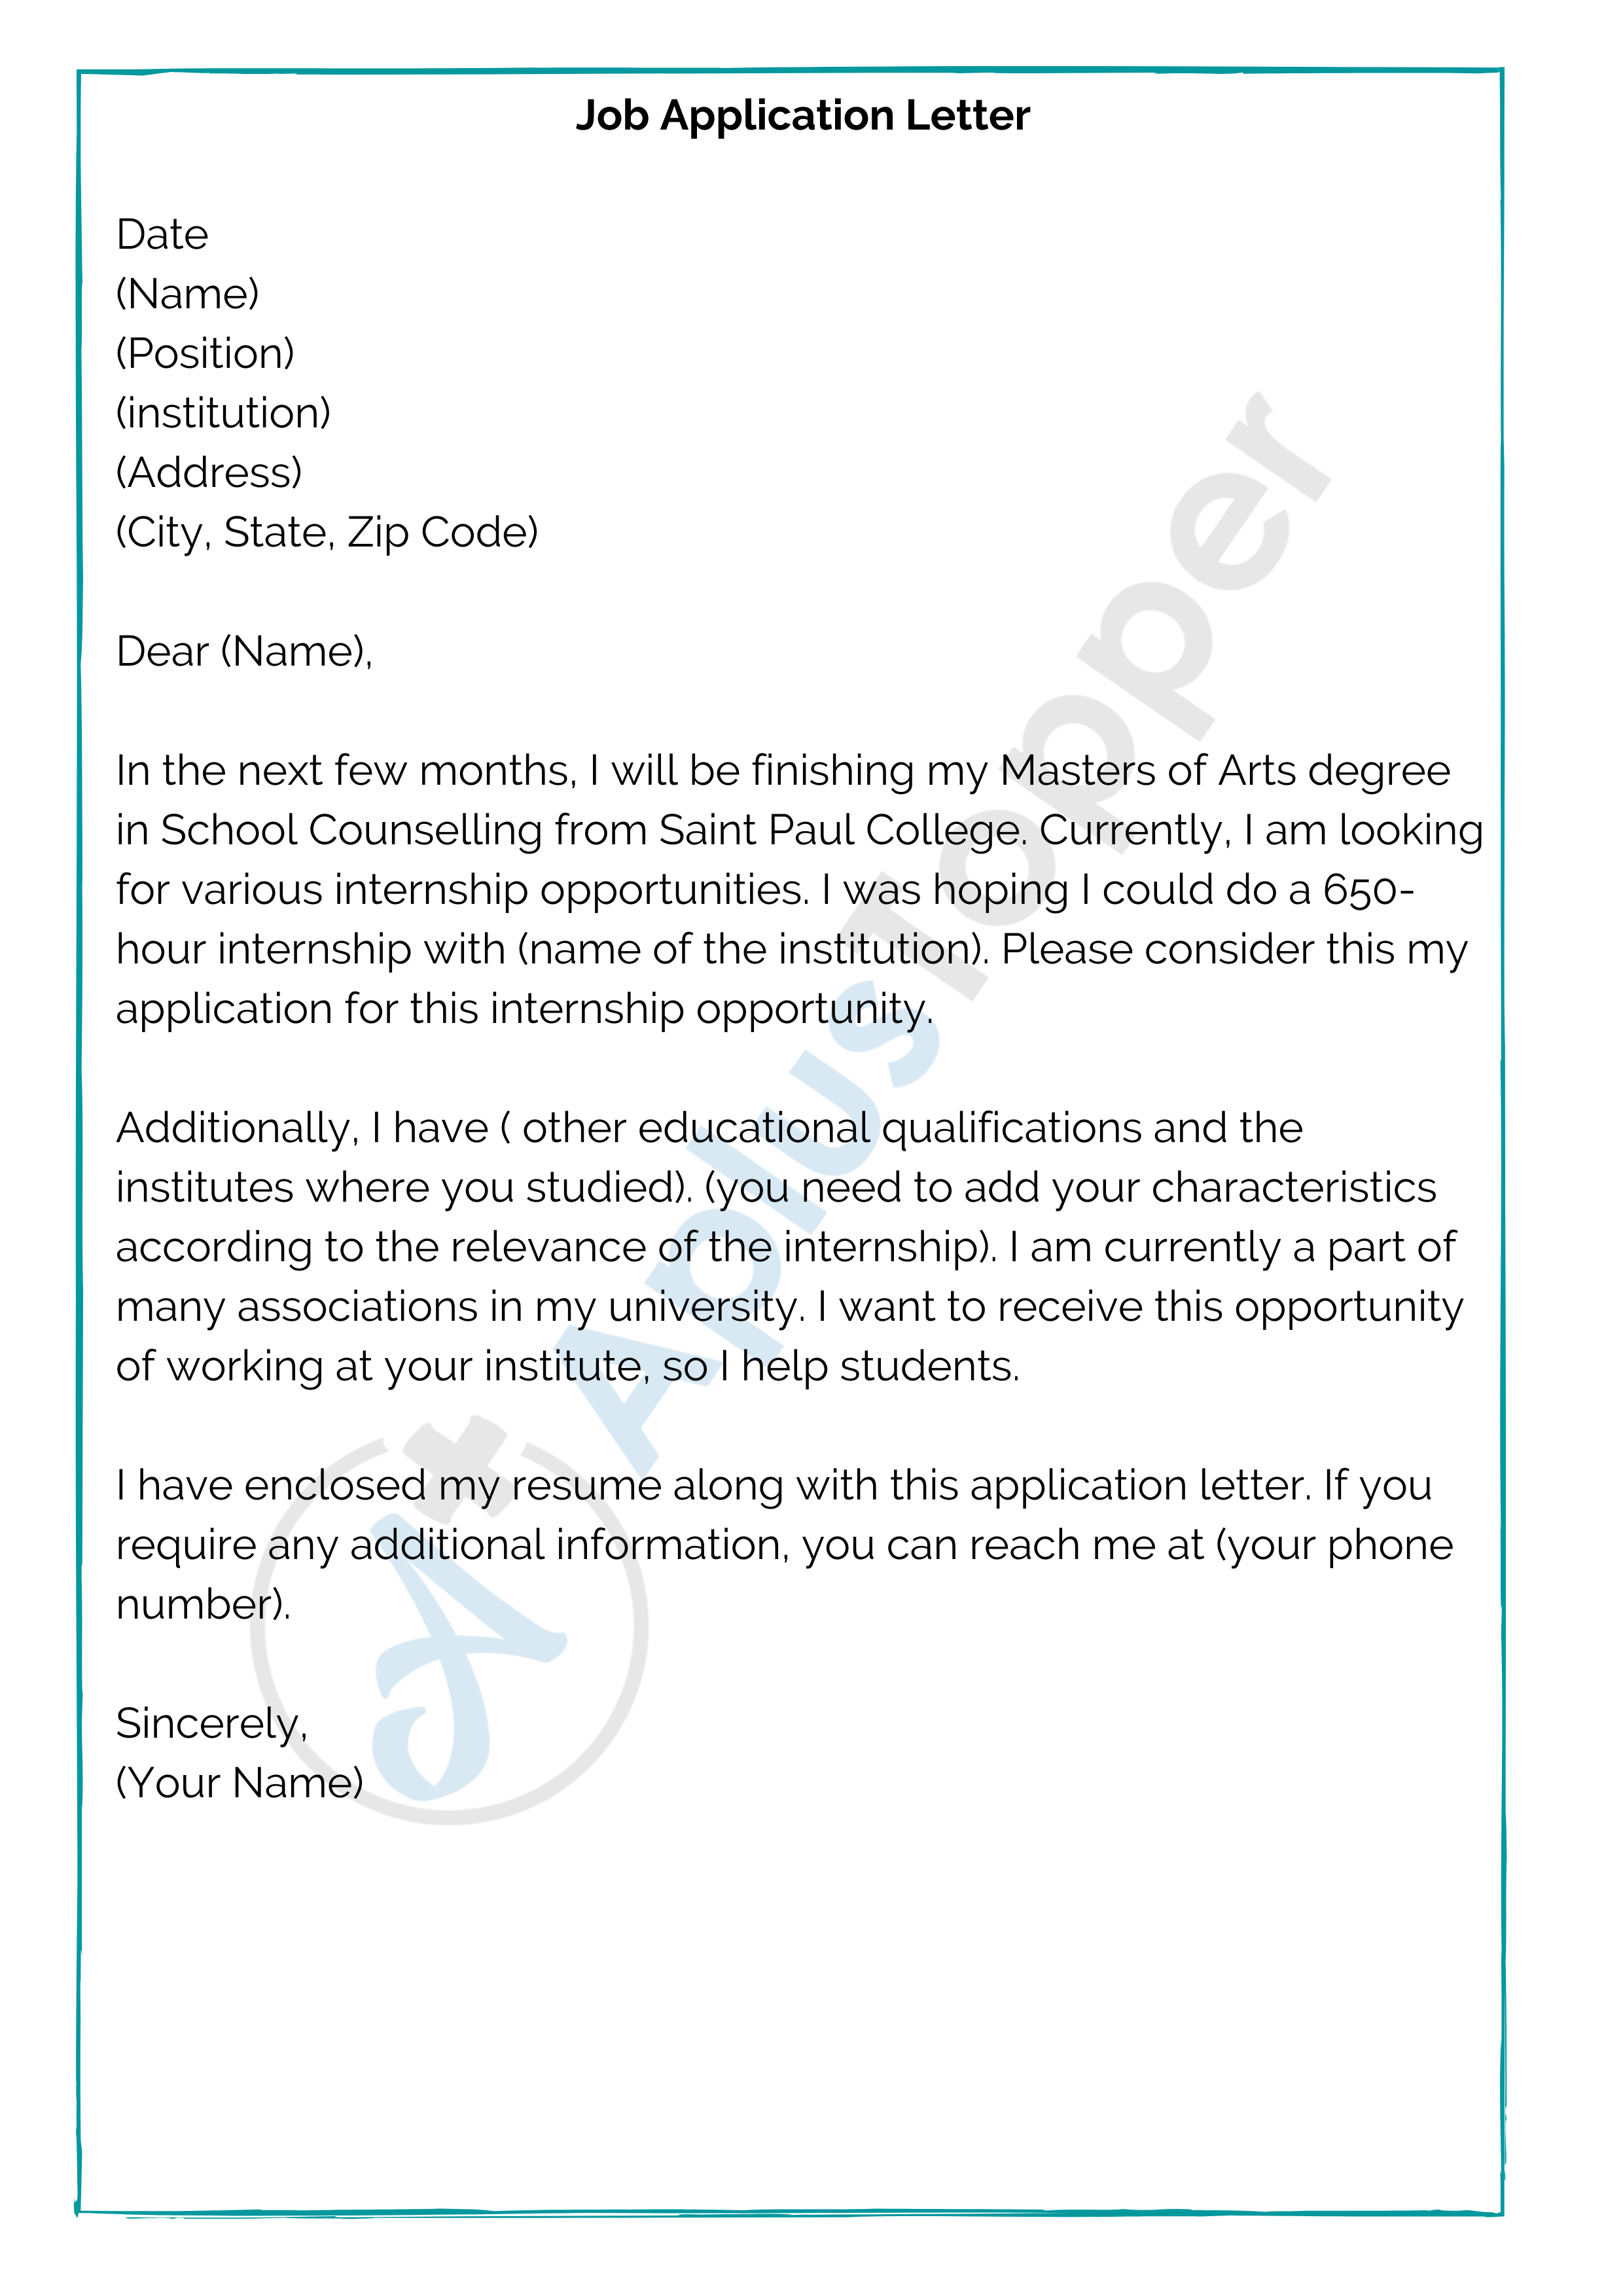 example of application letter making